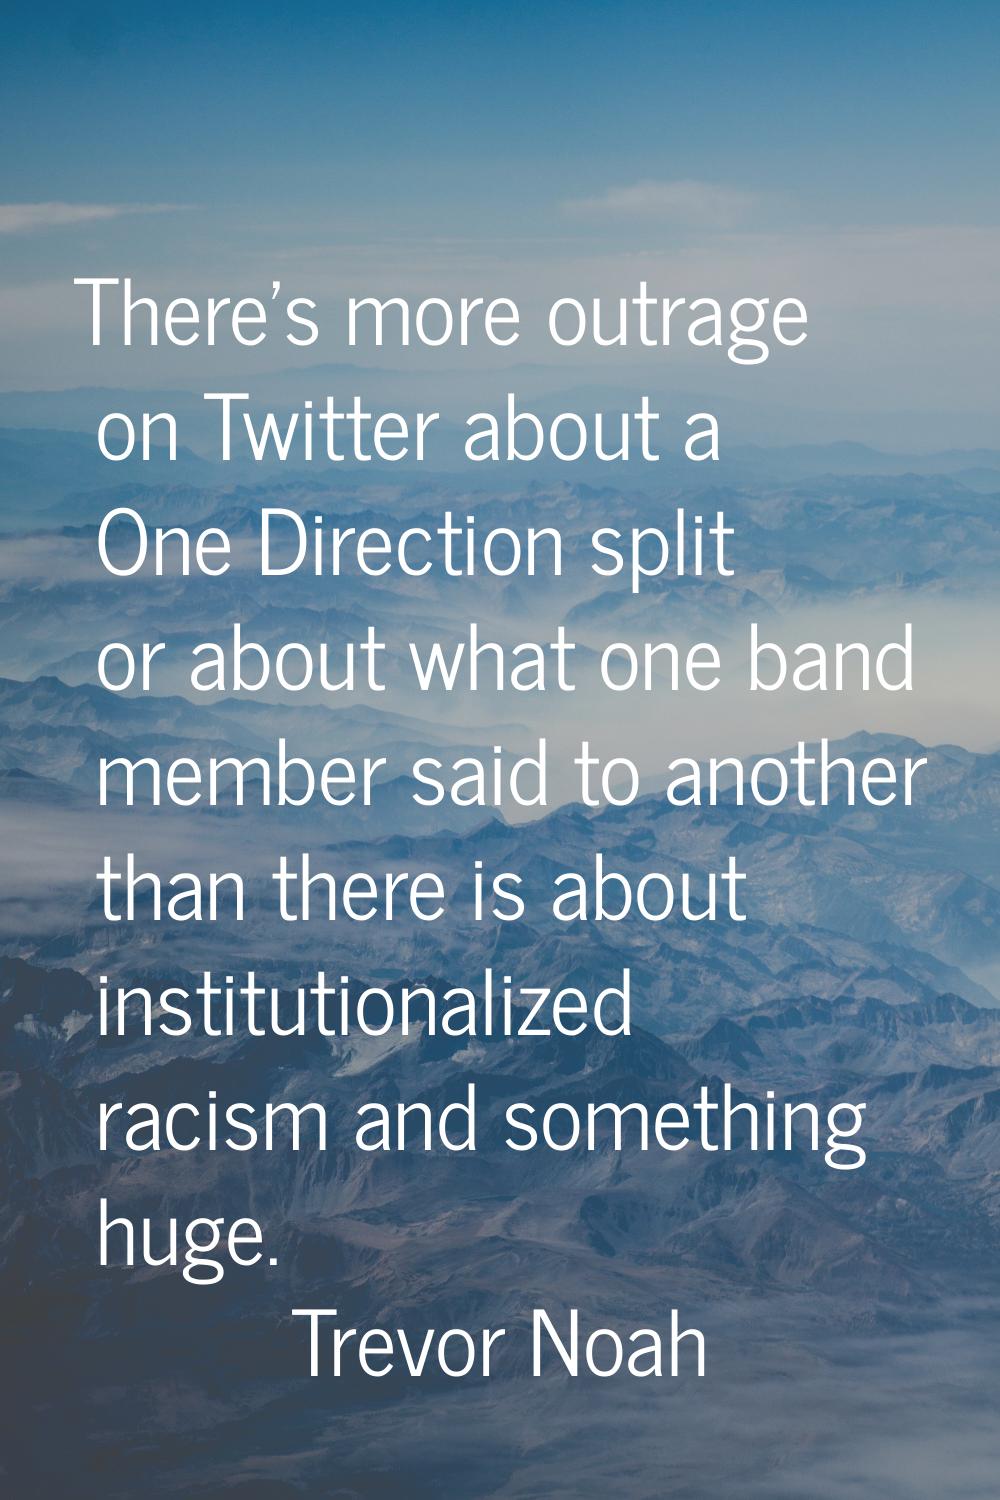 There's more outrage on Twitter about a One Direction split or about what one band member said to a